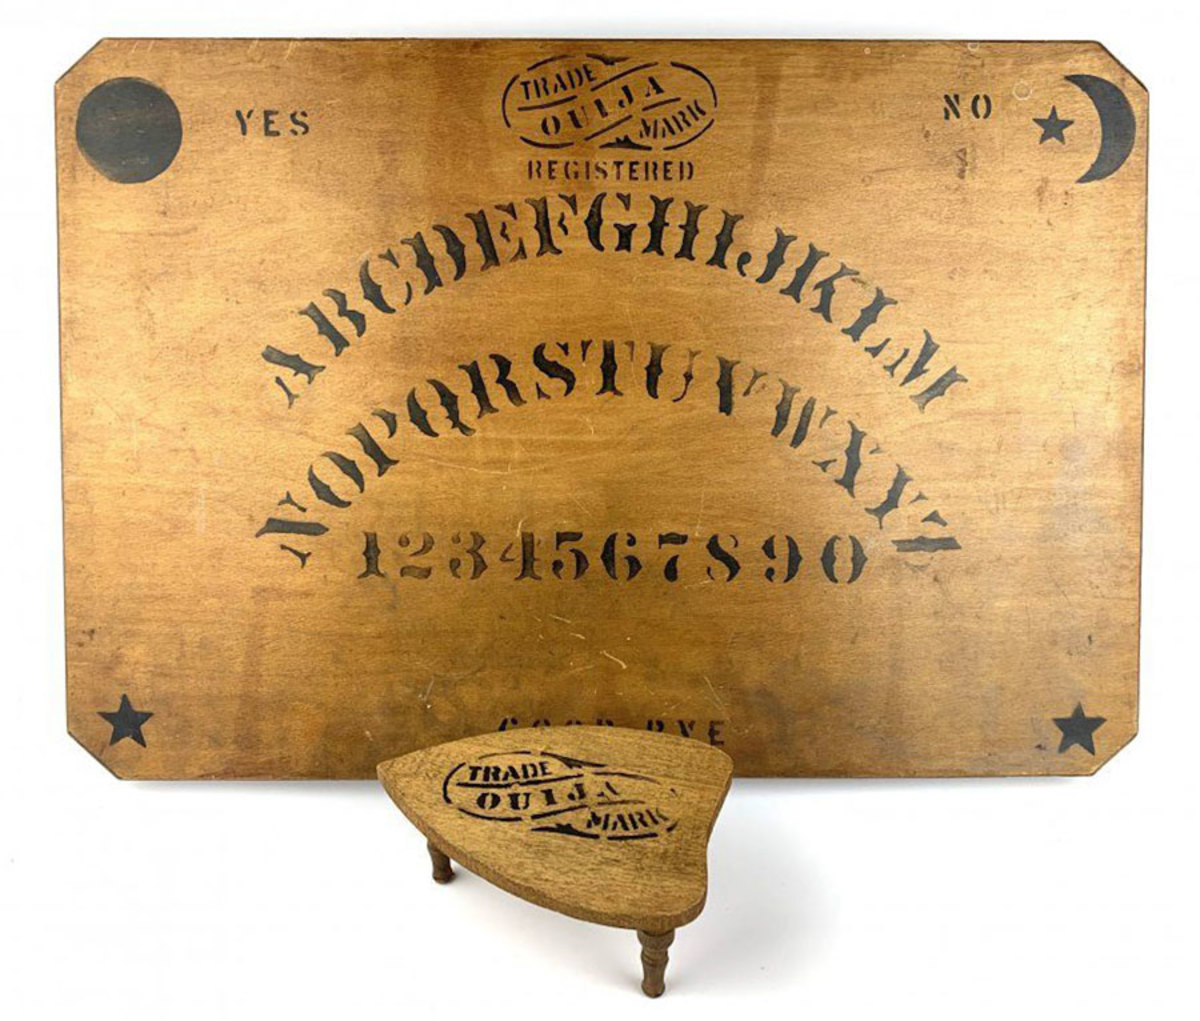 Board games are particularly in demand with the 20-40 age group, including Chutes and Ladders, Risk and Ouija boards. Victorian folk art 19th century Ouija board with matching planchette. Made around the turn of the century, stamped pattern on old corner cut plywood; $750.